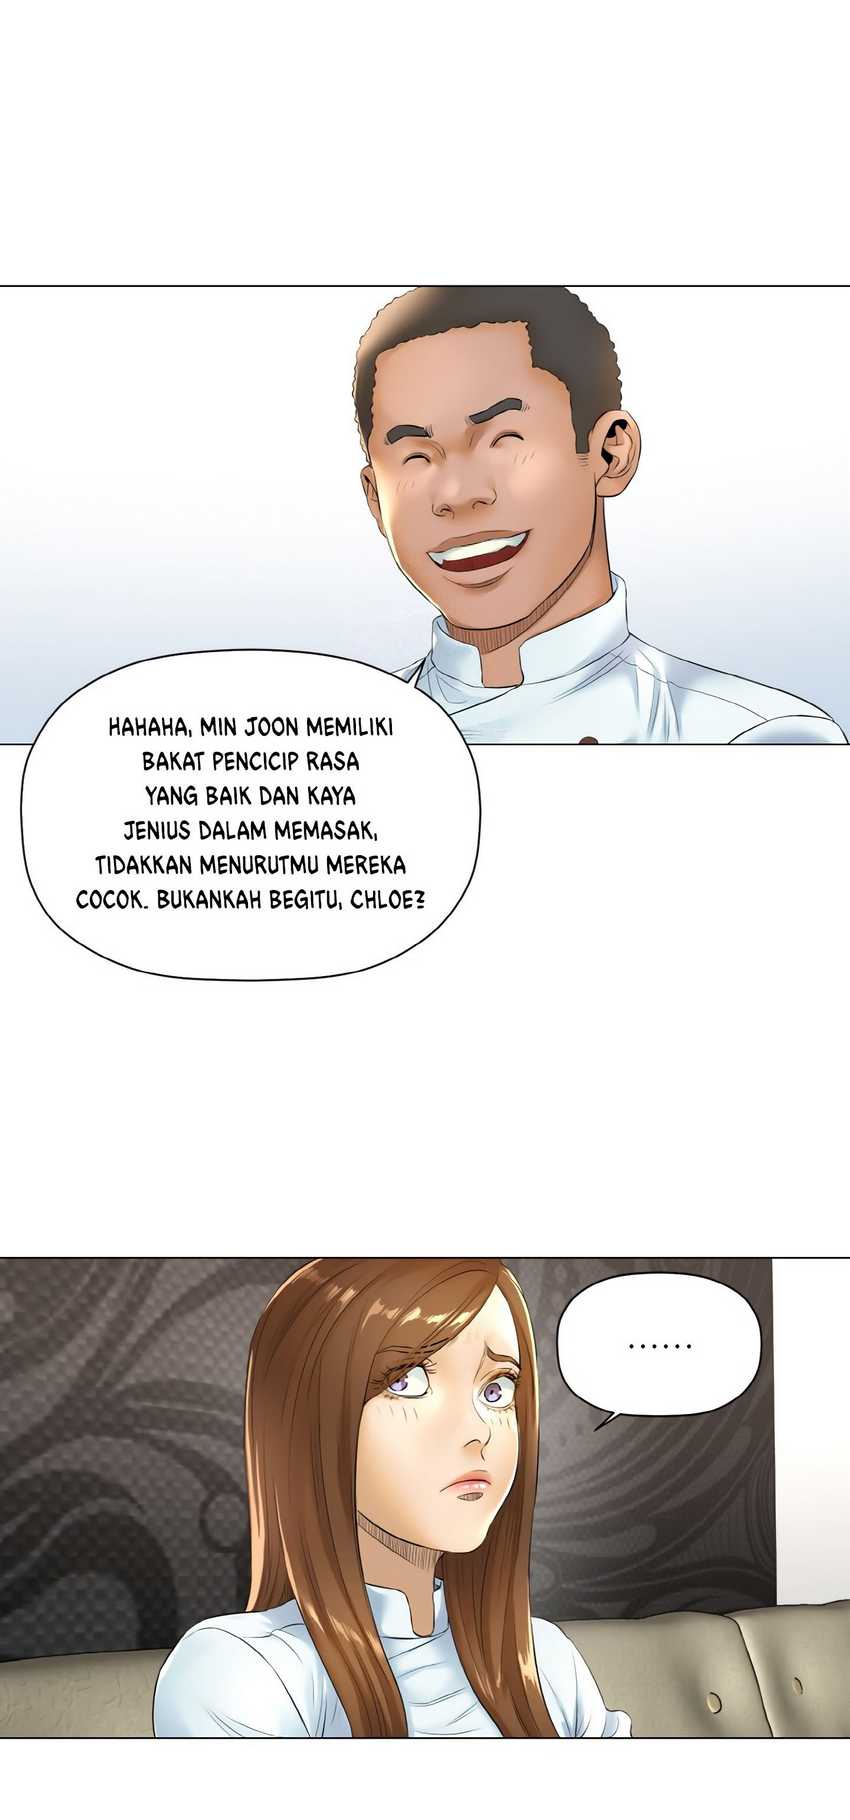 God of Cooking Chapter 14